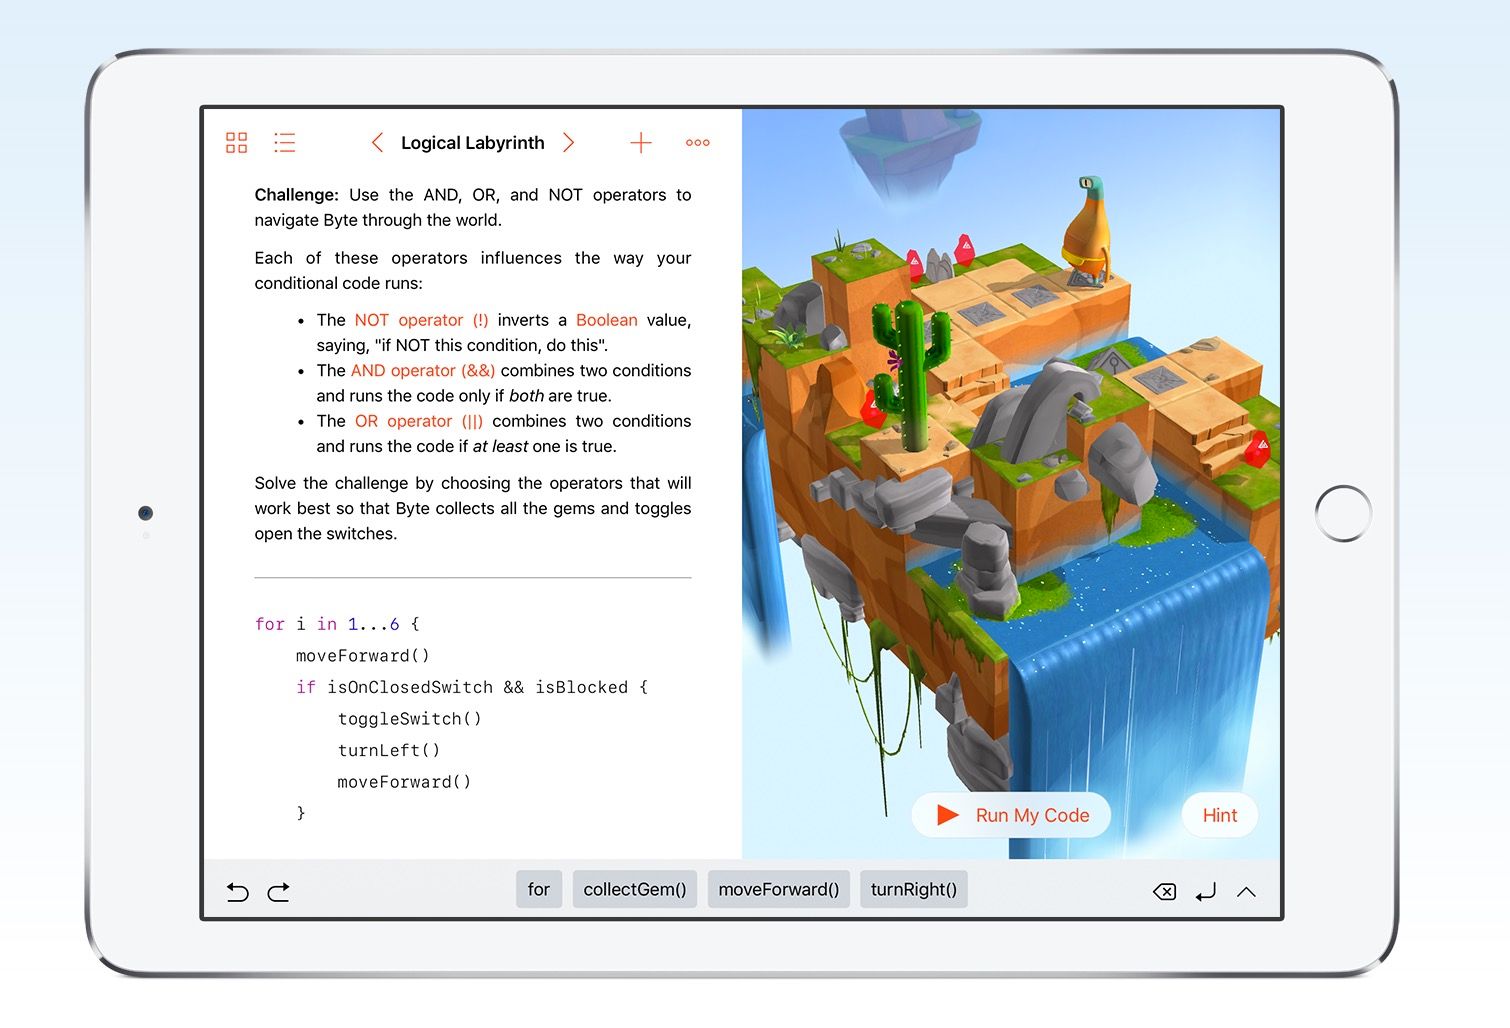 apple swift playgrounds app here s how it teaches kids to code on ipad image 2